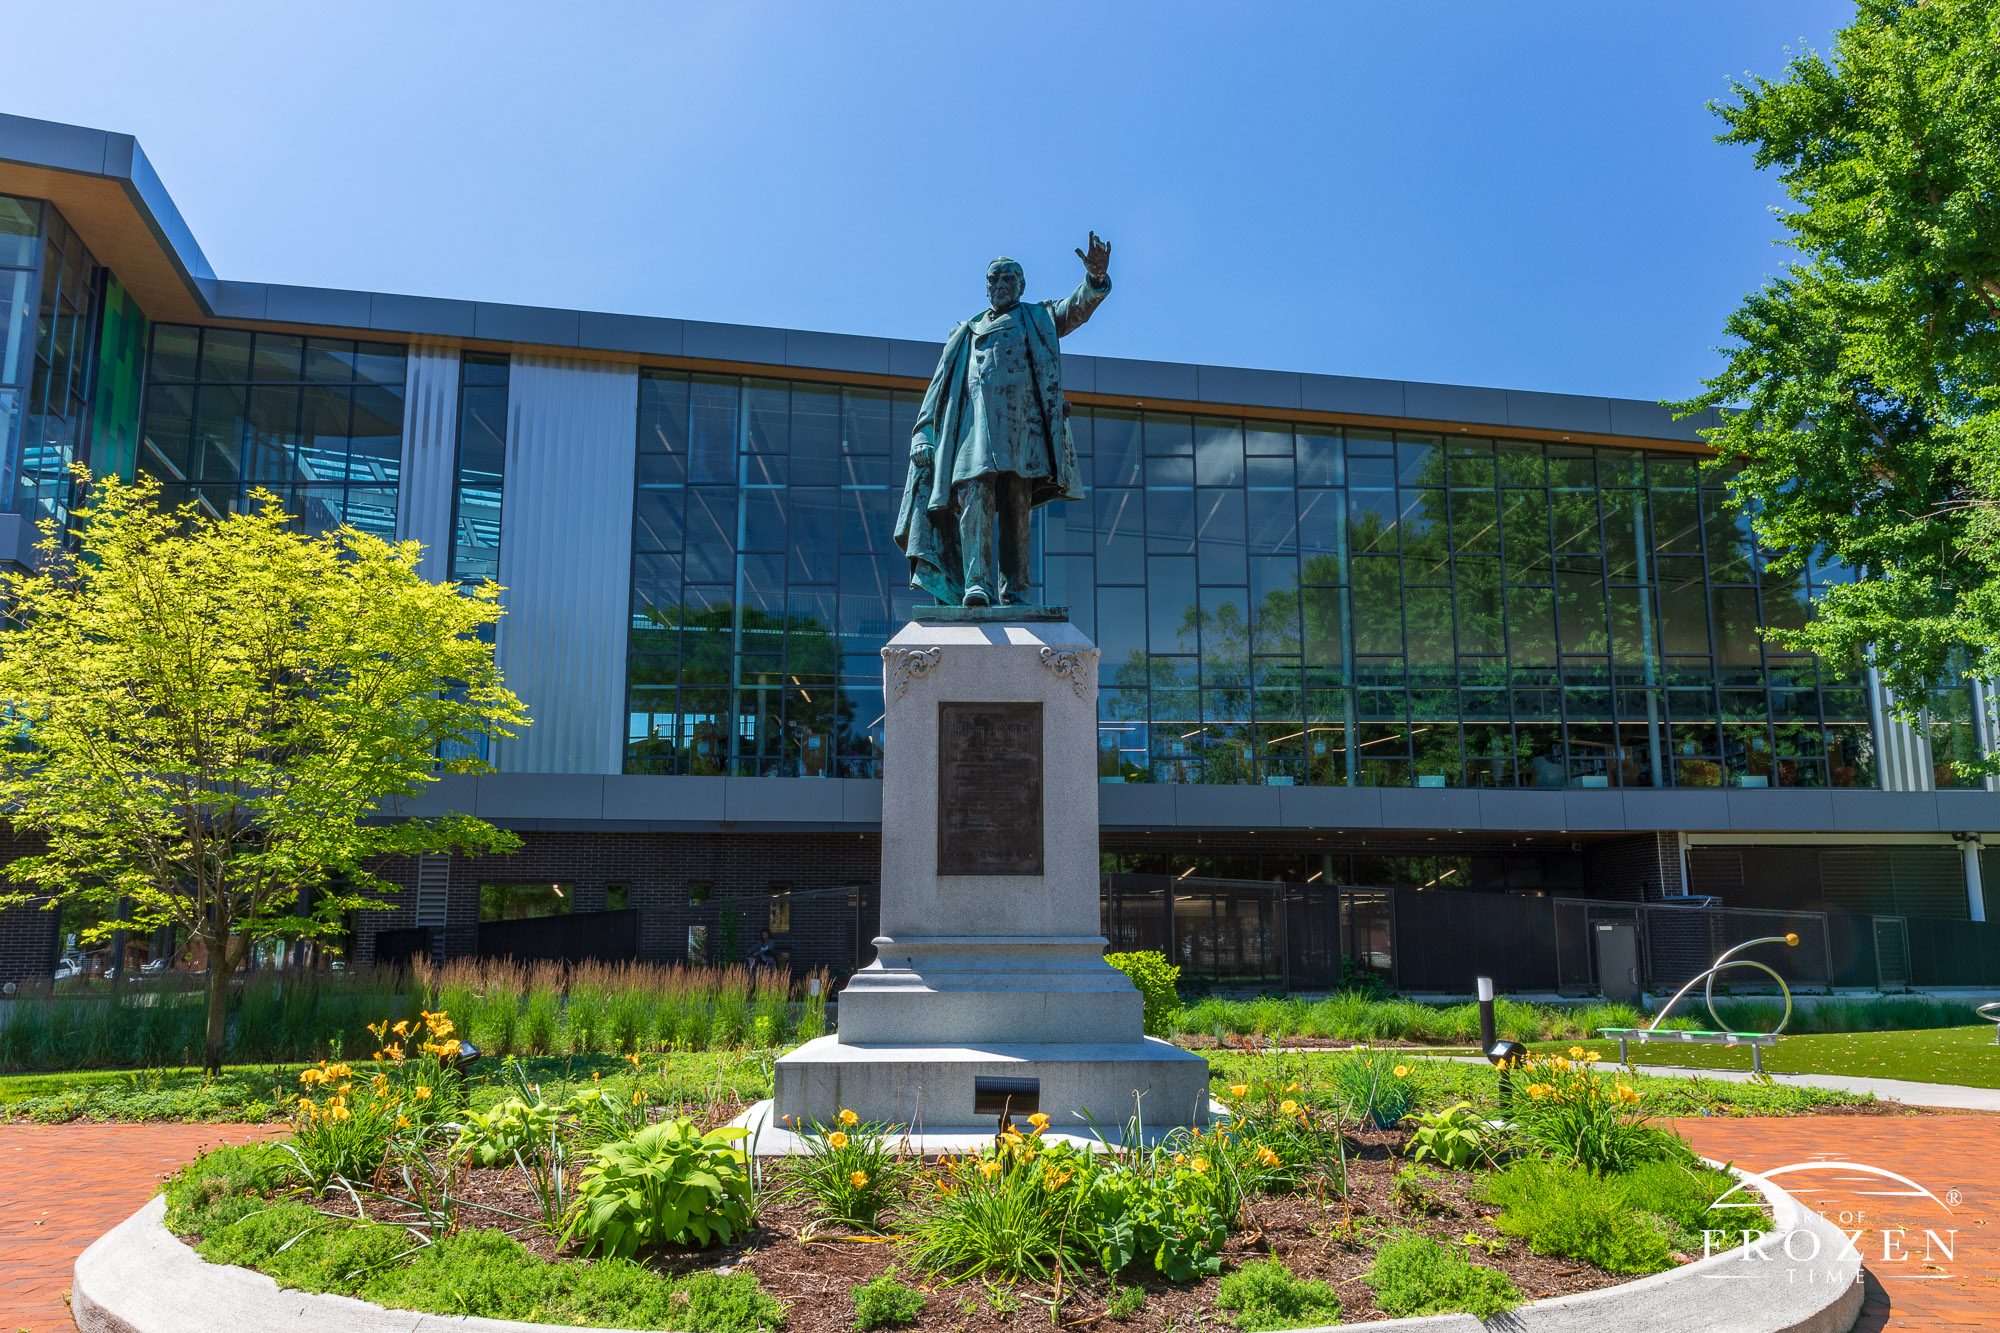 A bronze statue paying tribute to Ohio resident, President William McKinley shows 100 years of patina as it resides in front of the new Dayton Library in Cooper Park